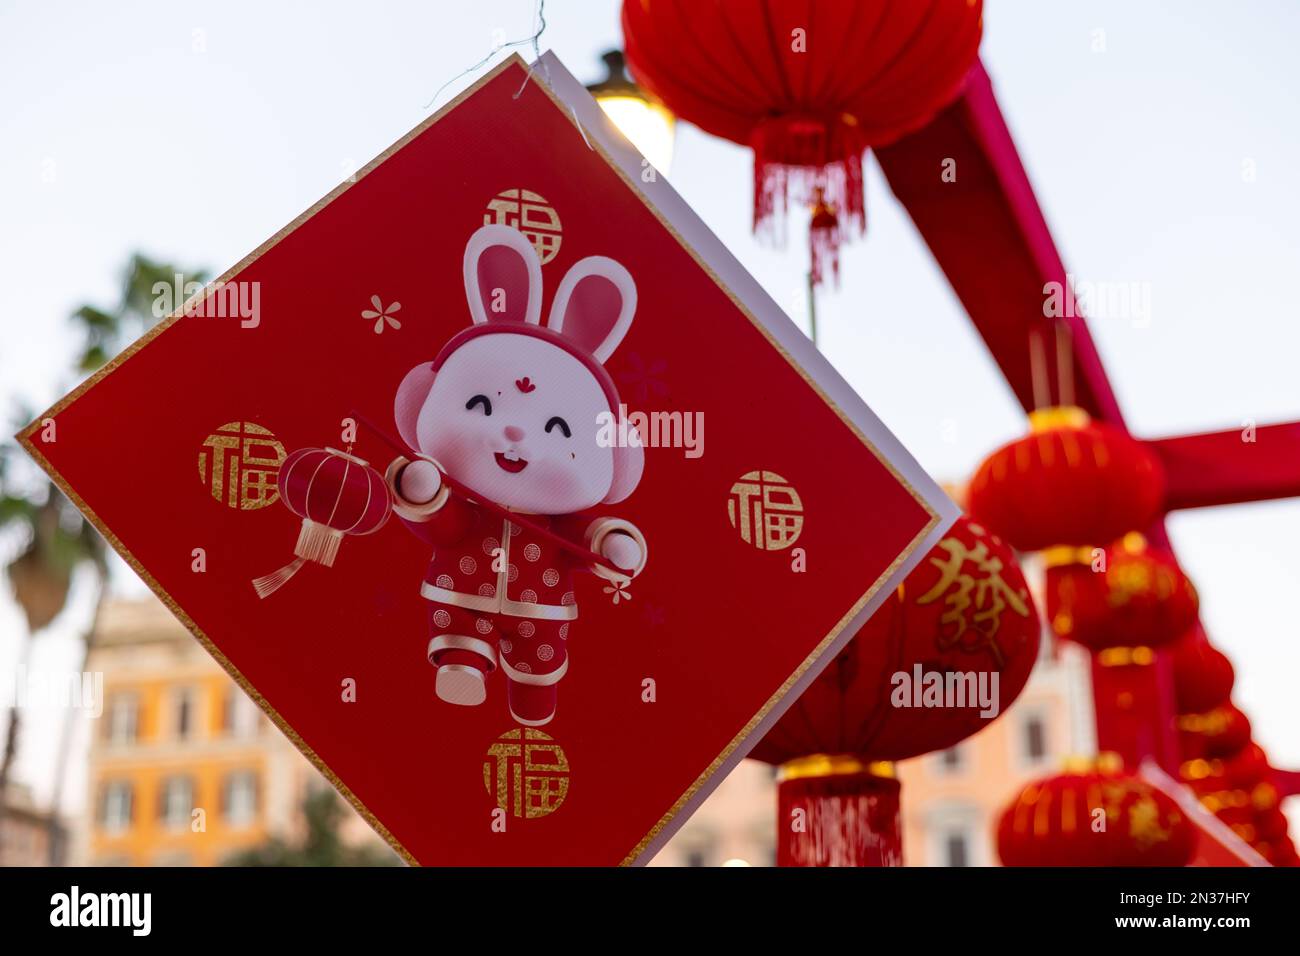 Rome, Italy - February 5, 2023: Citizens of the Chinese community celebrate their New Year's Eve party. The event with performances is open in plaza. Stock Photo